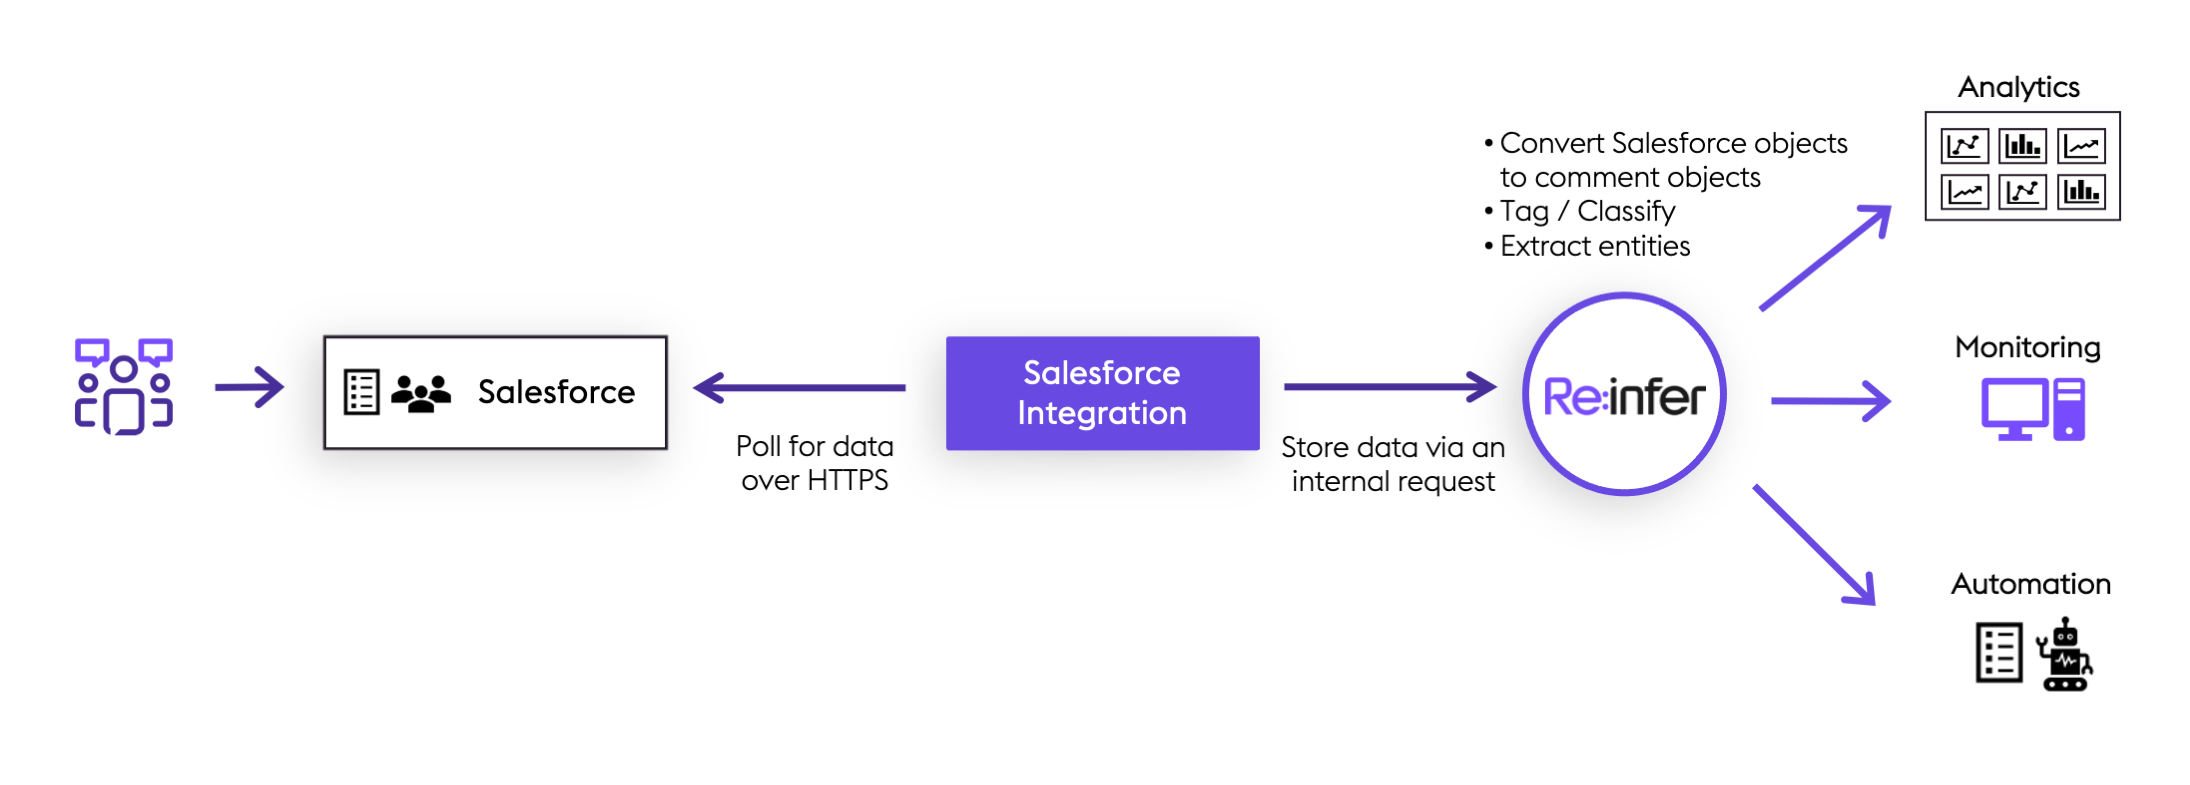 Salesforce Integration Architecture Overview